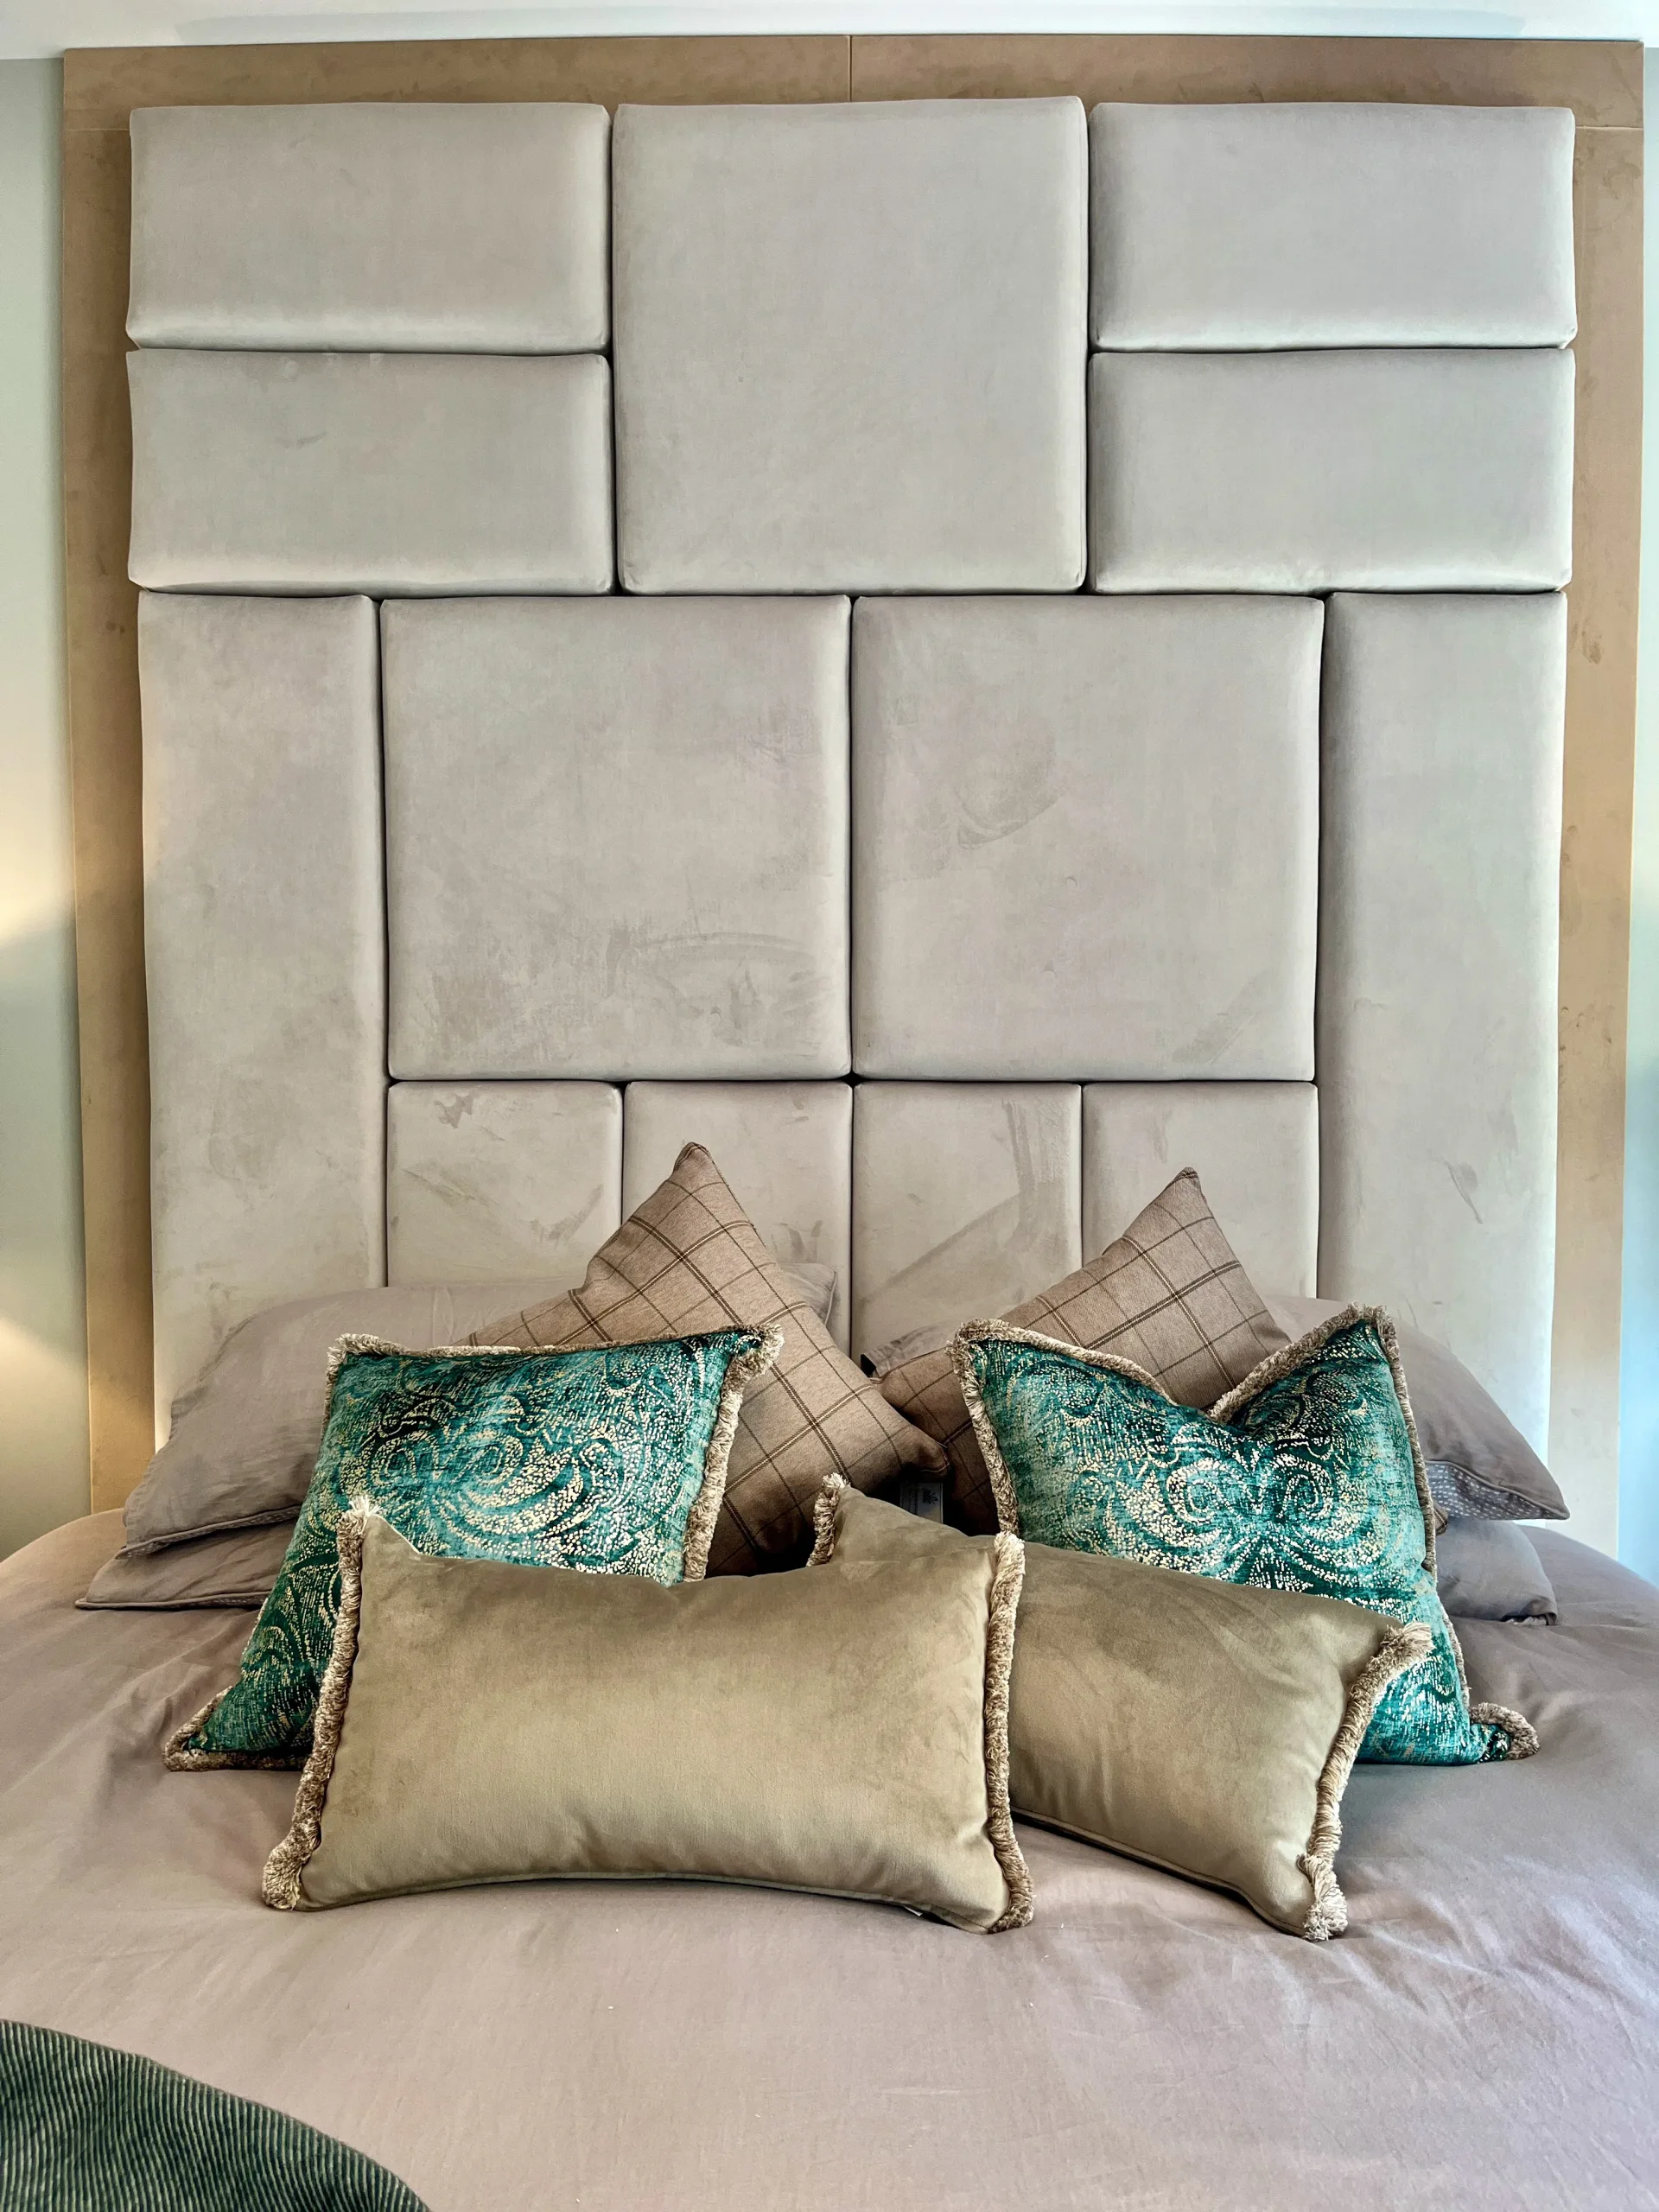 Large suede effect neutral headboard with cushions on bed in neutral and green tones.